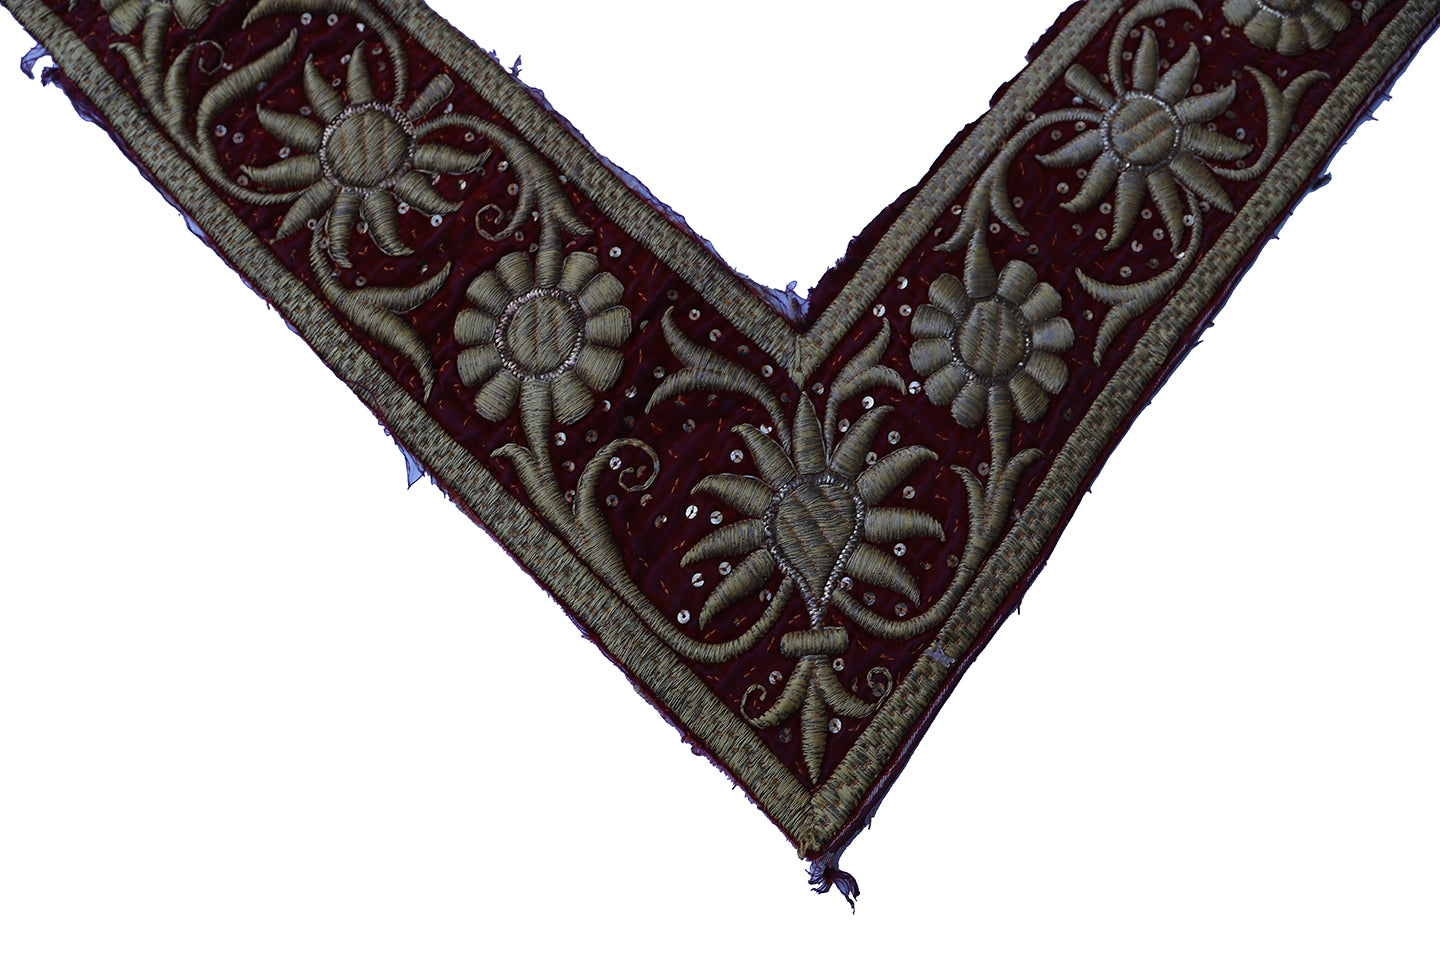 A Spectacular Antique Hand Embroidered Tapestry Border with Flowers Design For Picture Frame